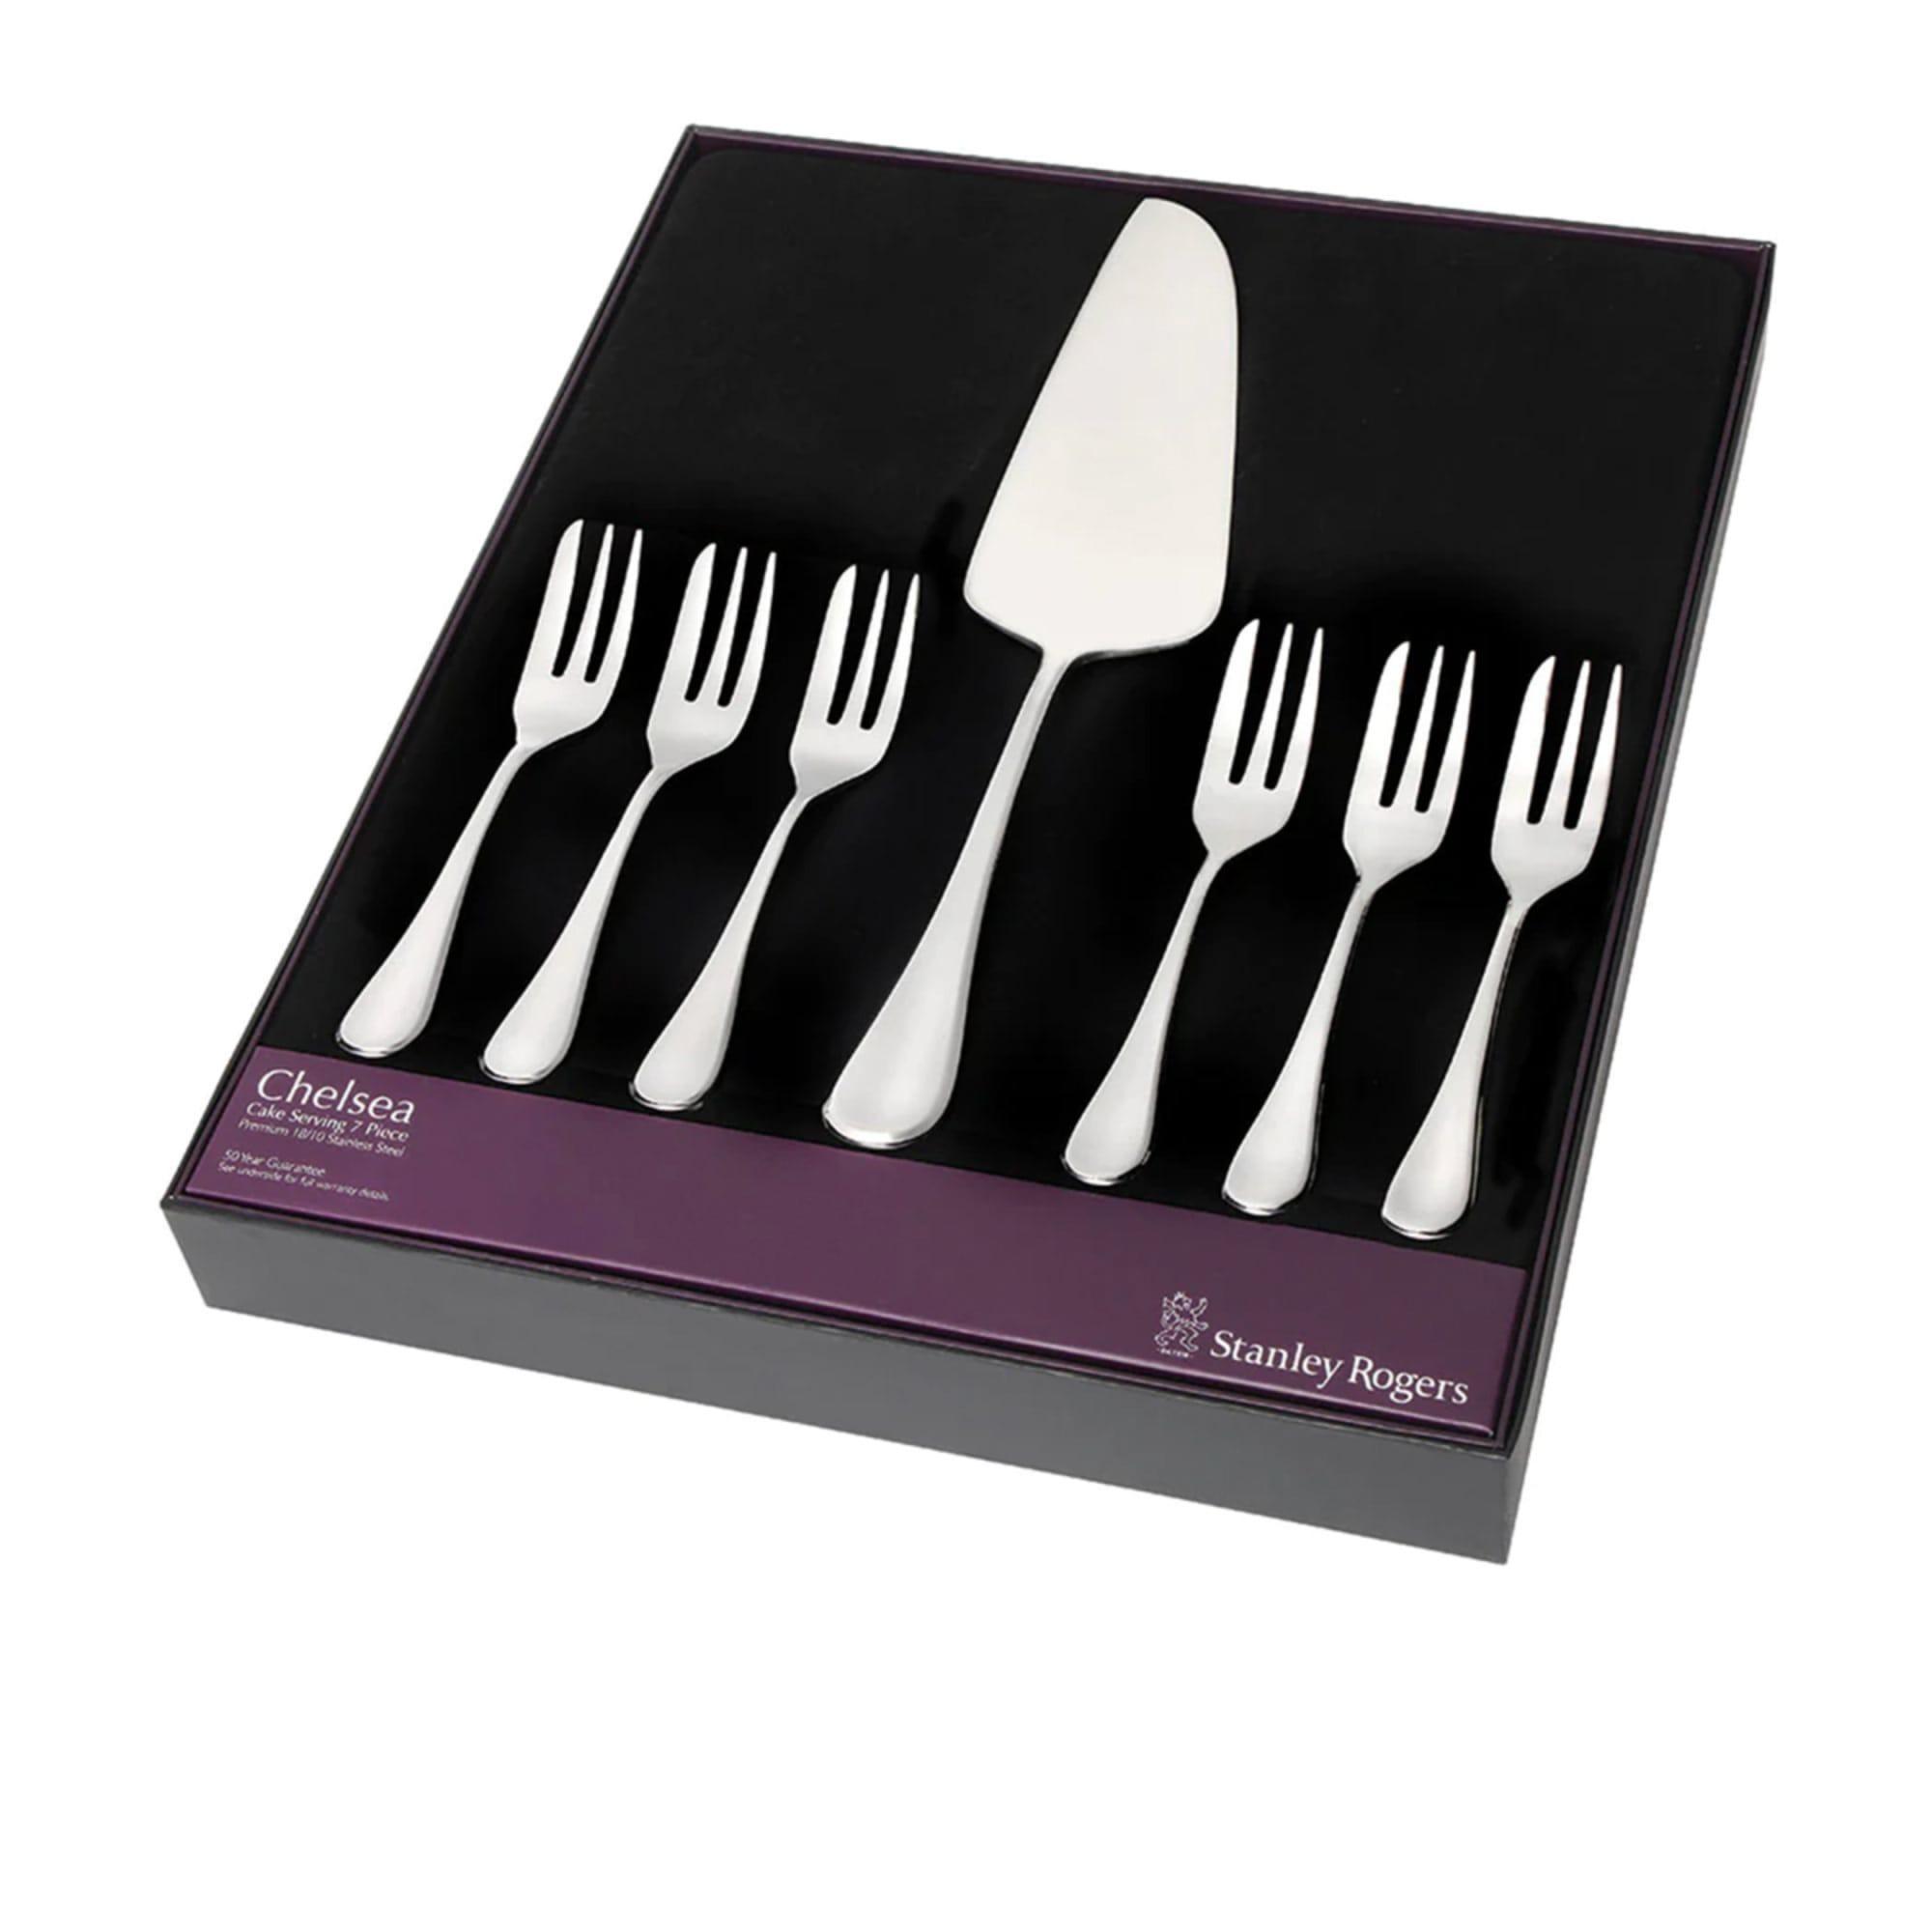 Stanley Rogers Chelsea Cake Serving Set 7pc Image 5